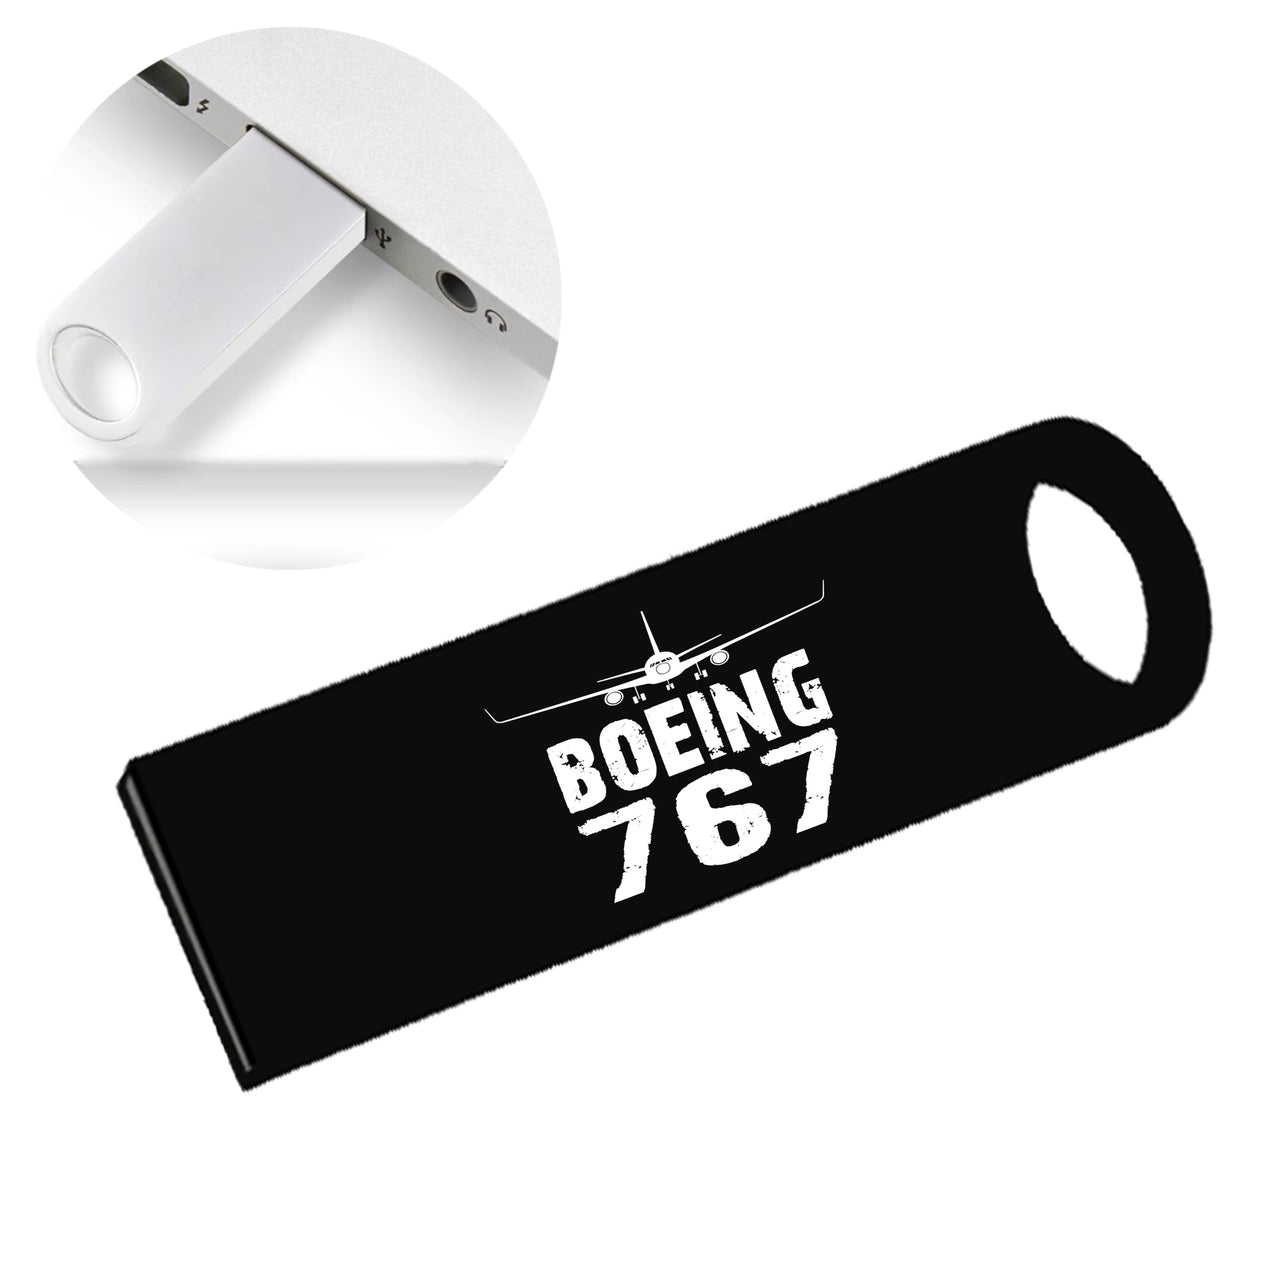 Boeing 767 & Plane Designed Waterproof USB Devices